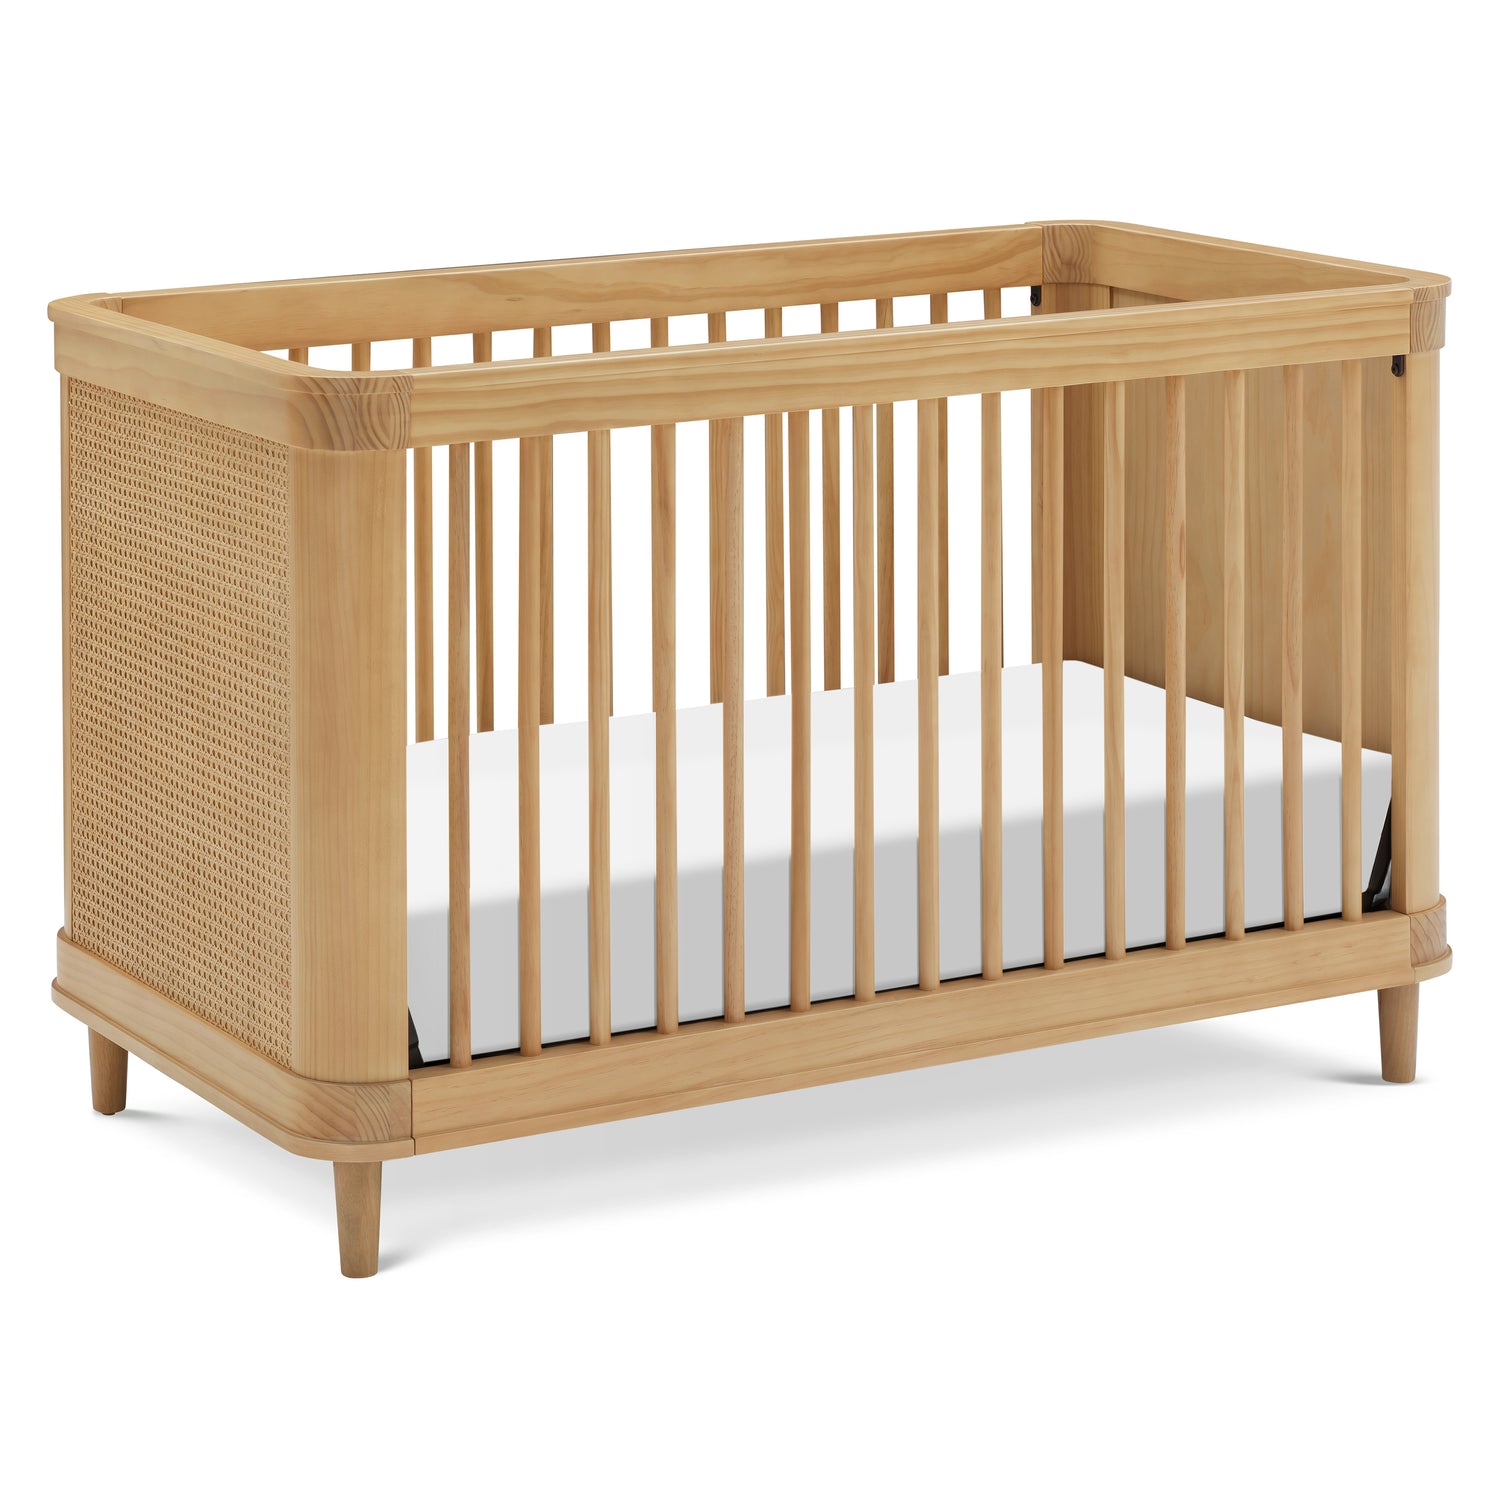 Angle bed, M23701HYHC,Marin with Cane 3-in-1 Convertible Crib in Honey and Honey Cane